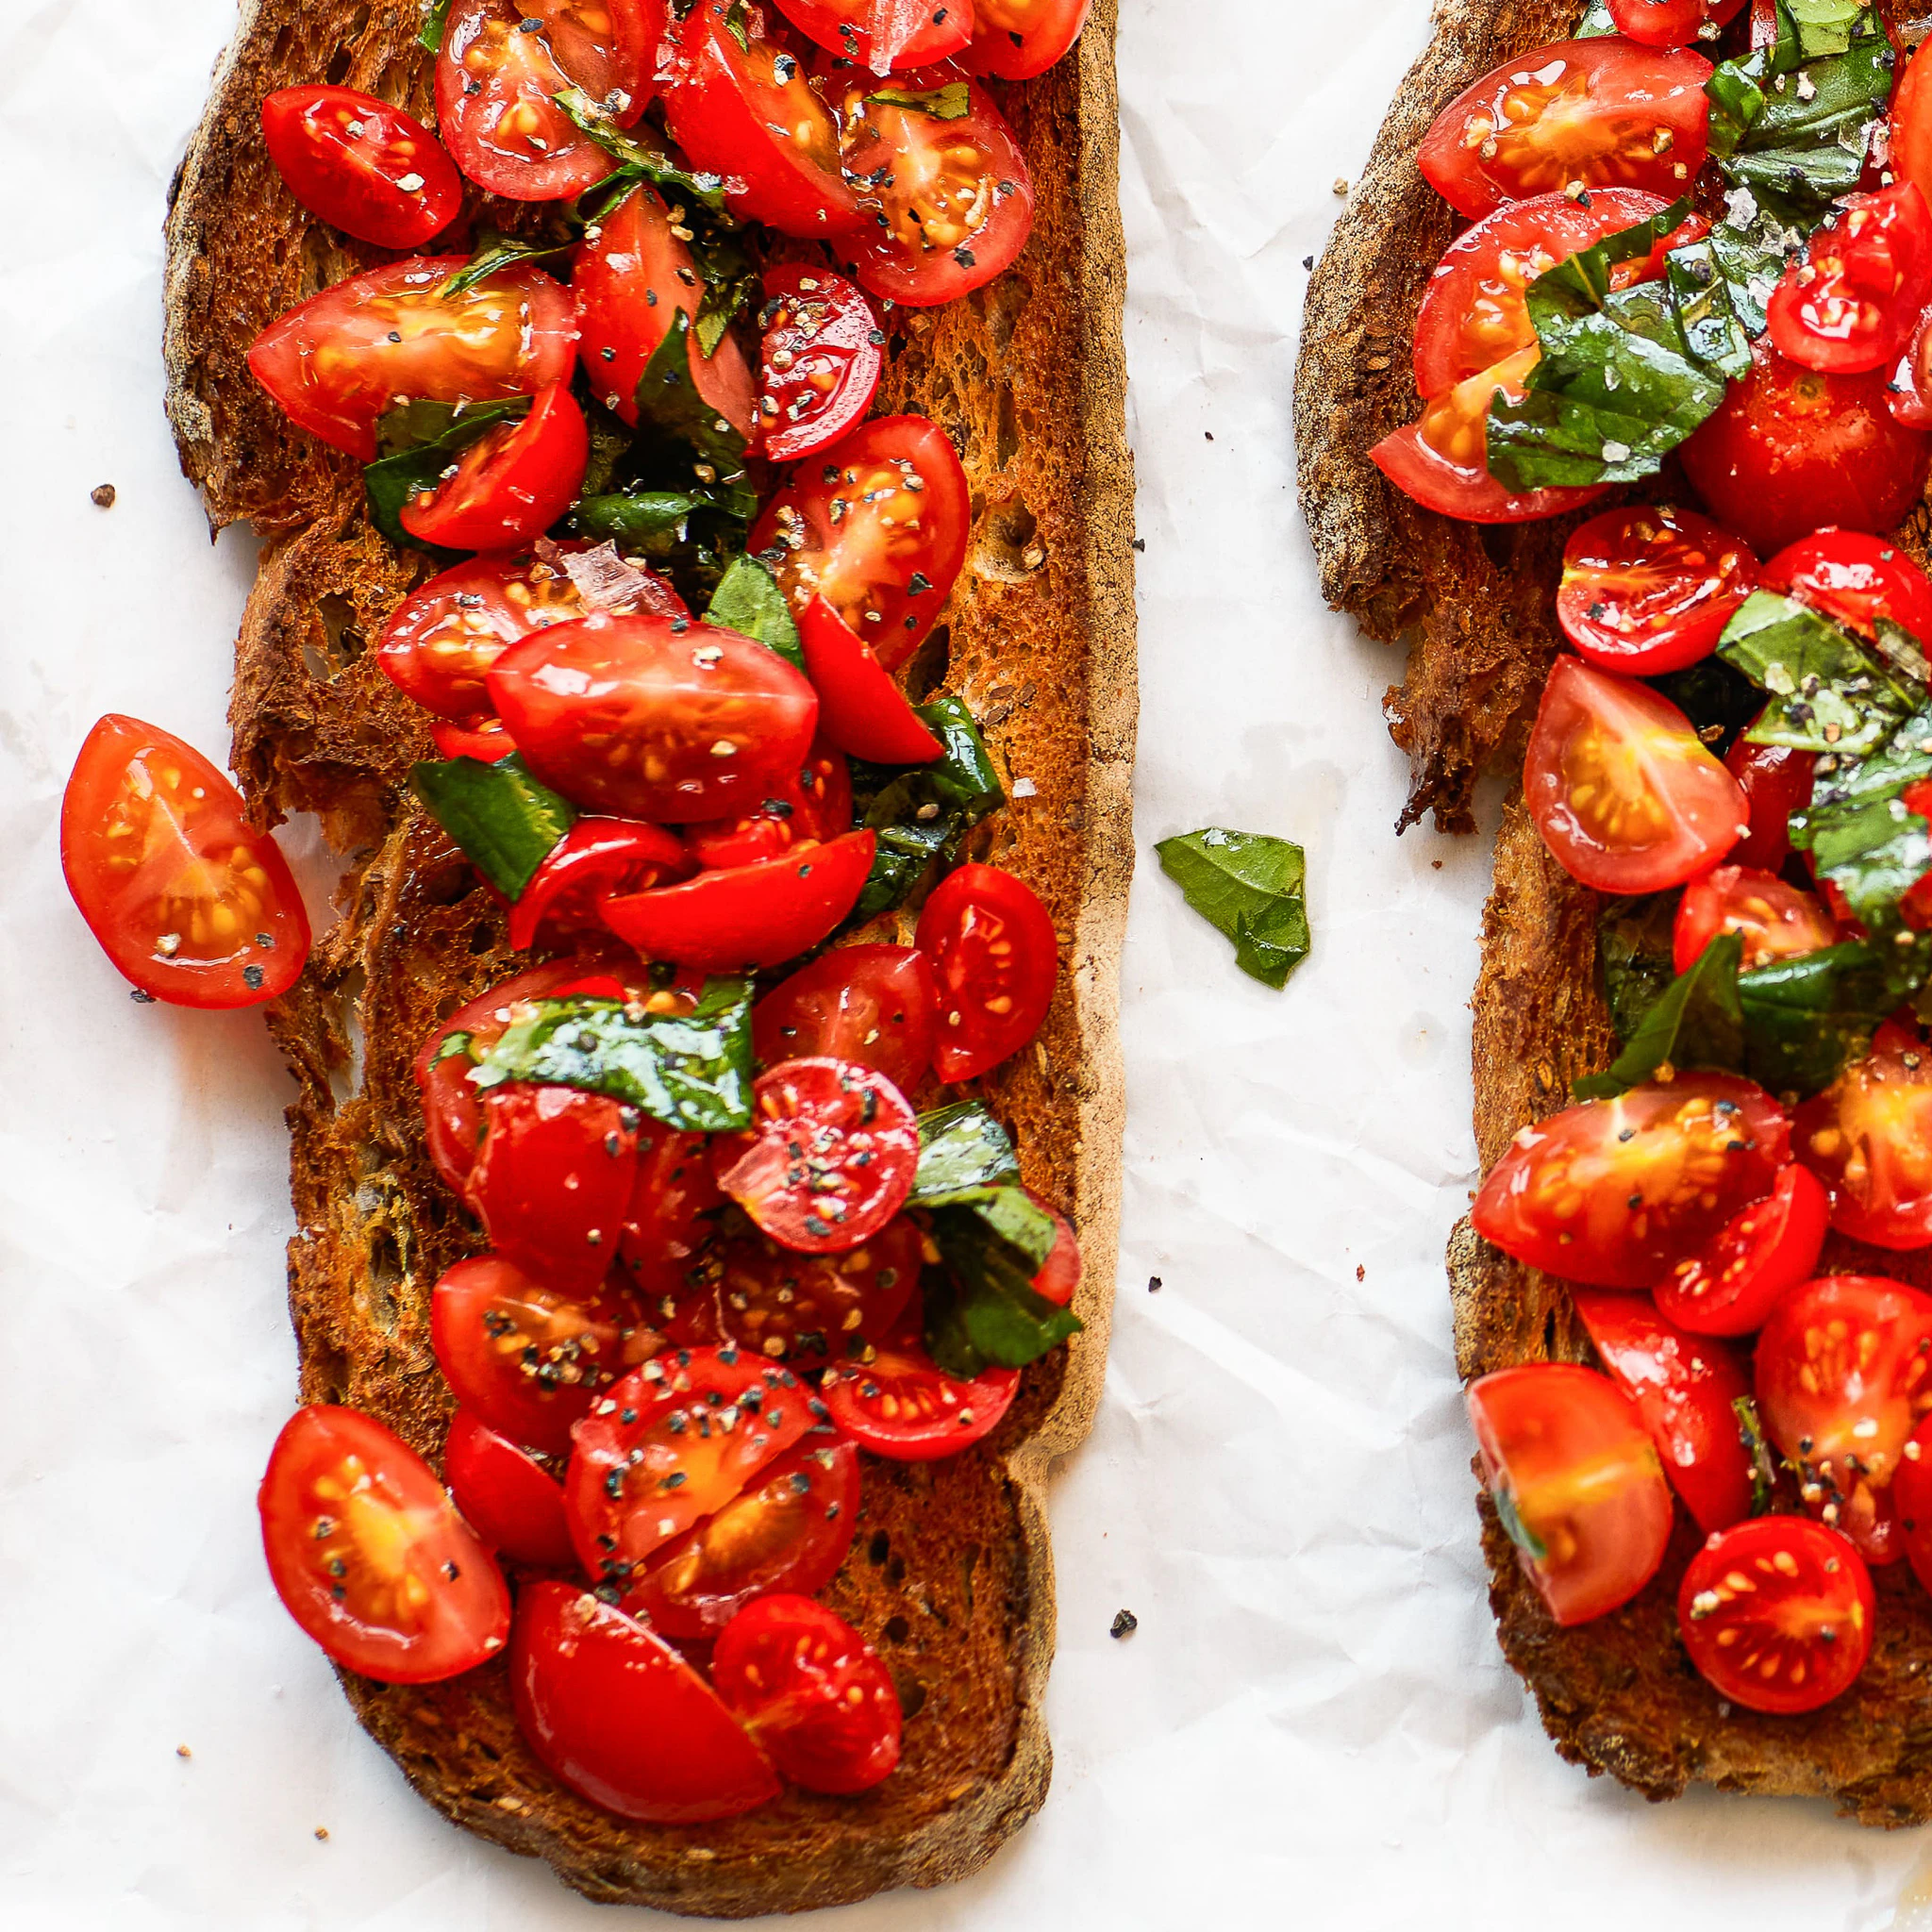 A slice of pane Pugliese bread topped with sliced tomatoes and fresh basil.